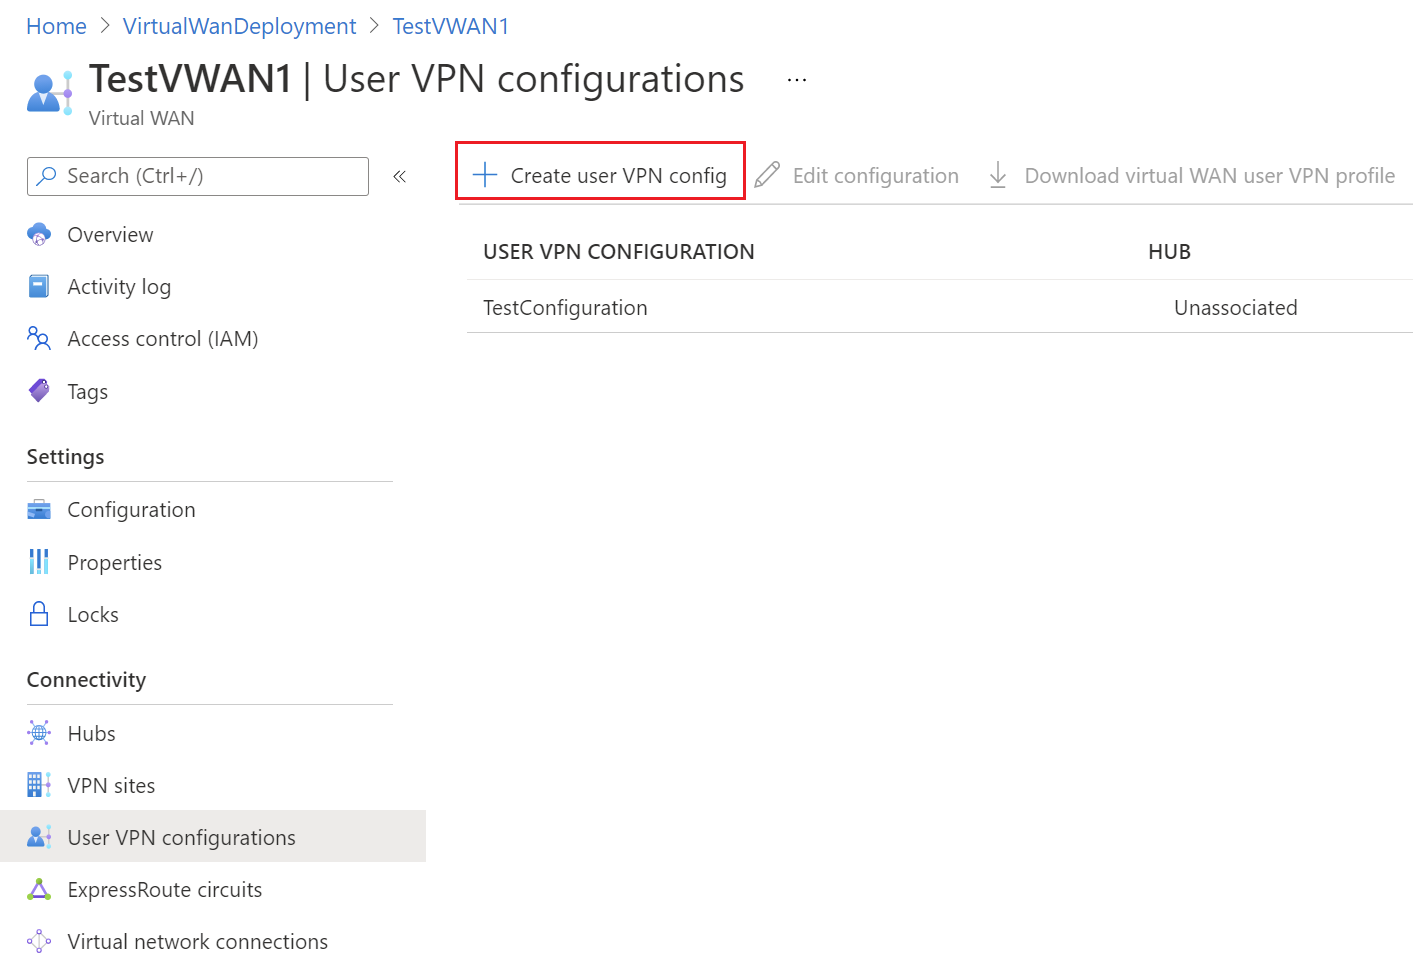 Screenshot of user VPN configurations page.